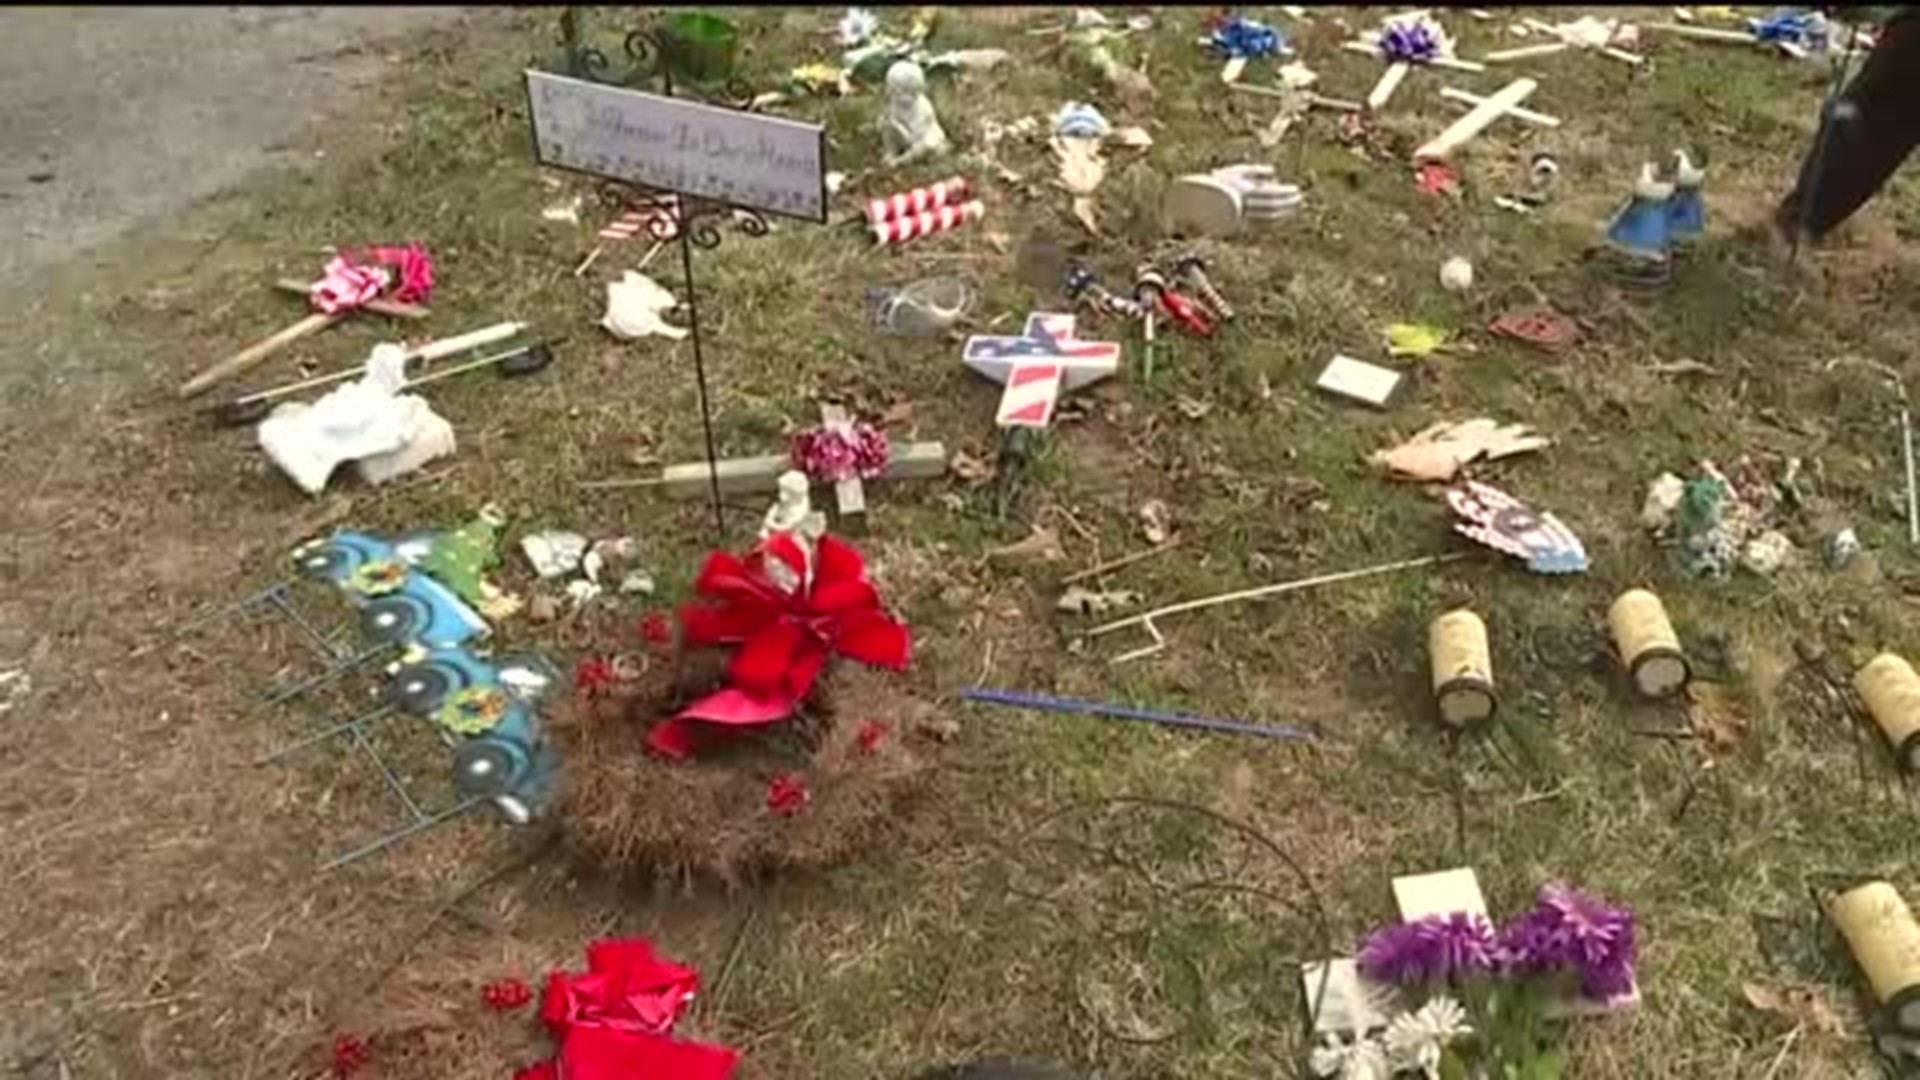 Social Media Posts Lead to Uproar Over Cemetery